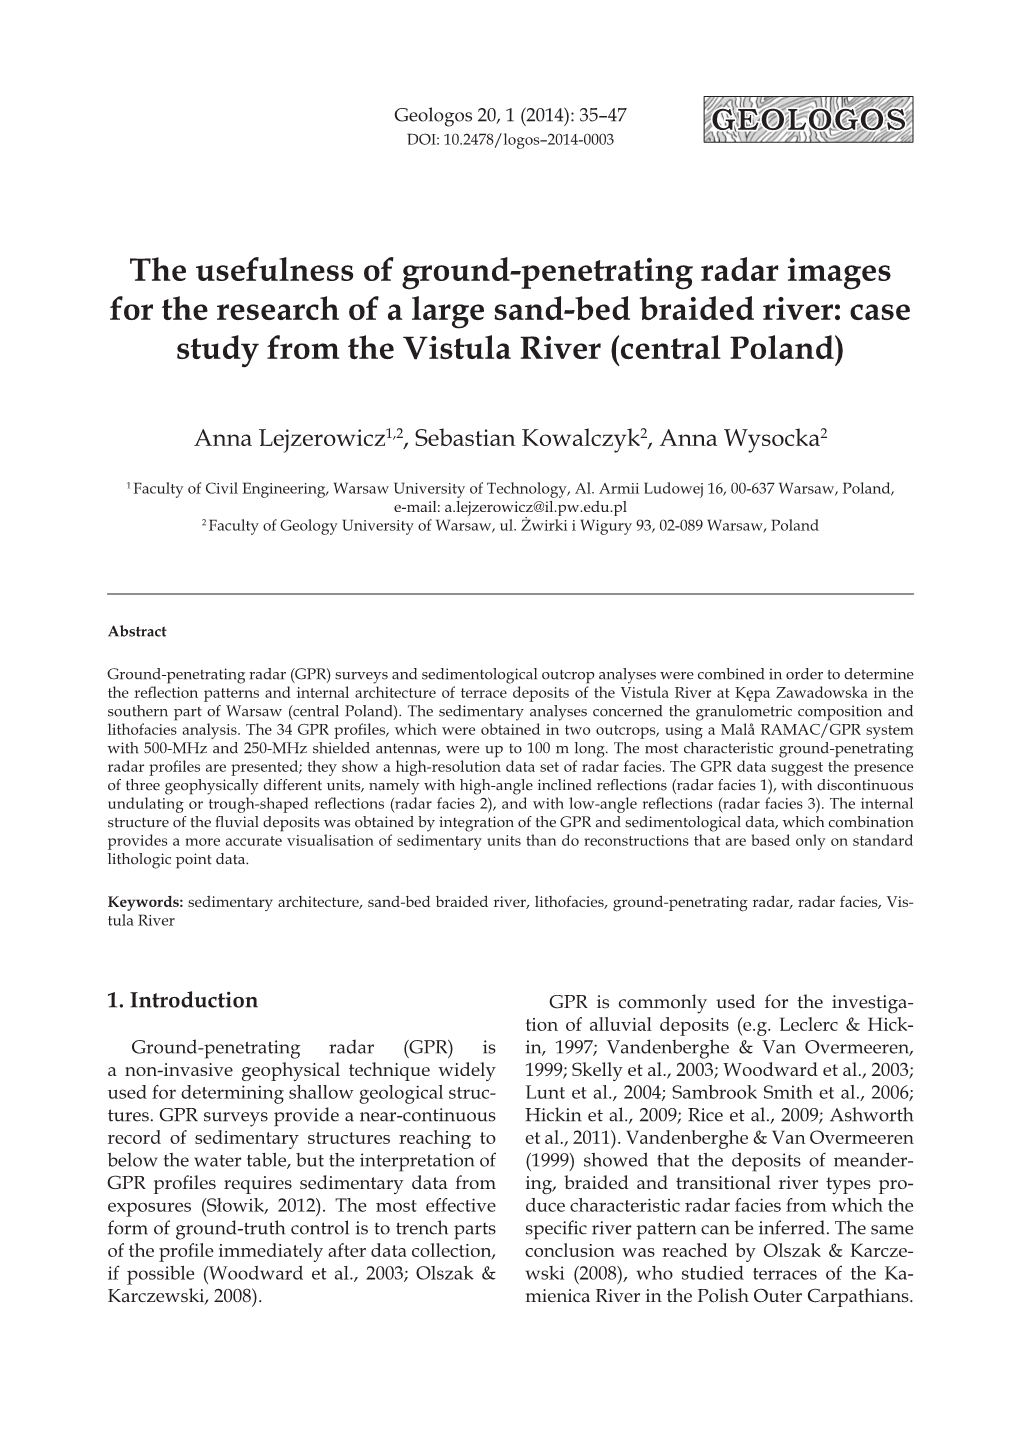 The Usefulness of Ground-Penetrating Radar Images for the Research of a Large Sand-Bed Braided River: Case Study from the Vistula River (Central Poland)